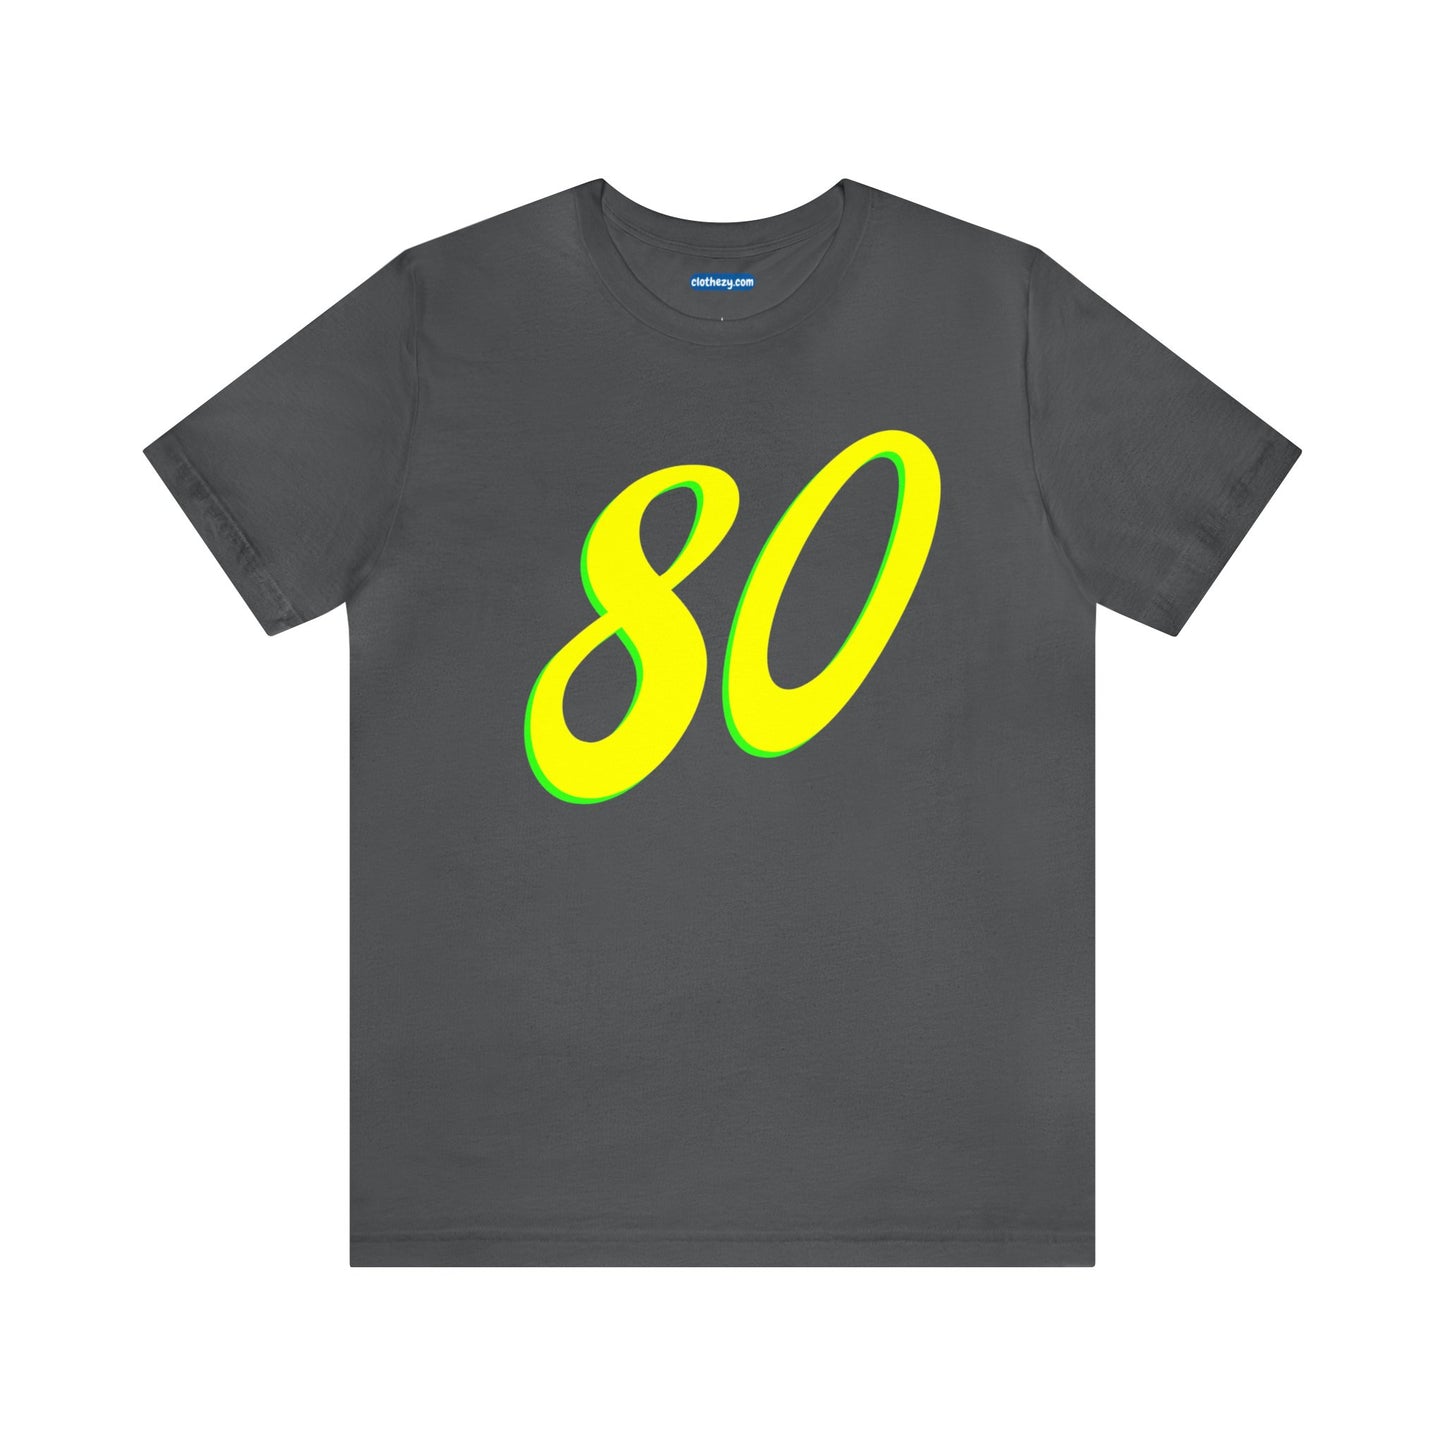 Number 80 Design - Soft Cotton Tee for birthdays and celebrations, Gift for friends and family, Multiple Options by clothezy.com in Black Size Small - Buy Now